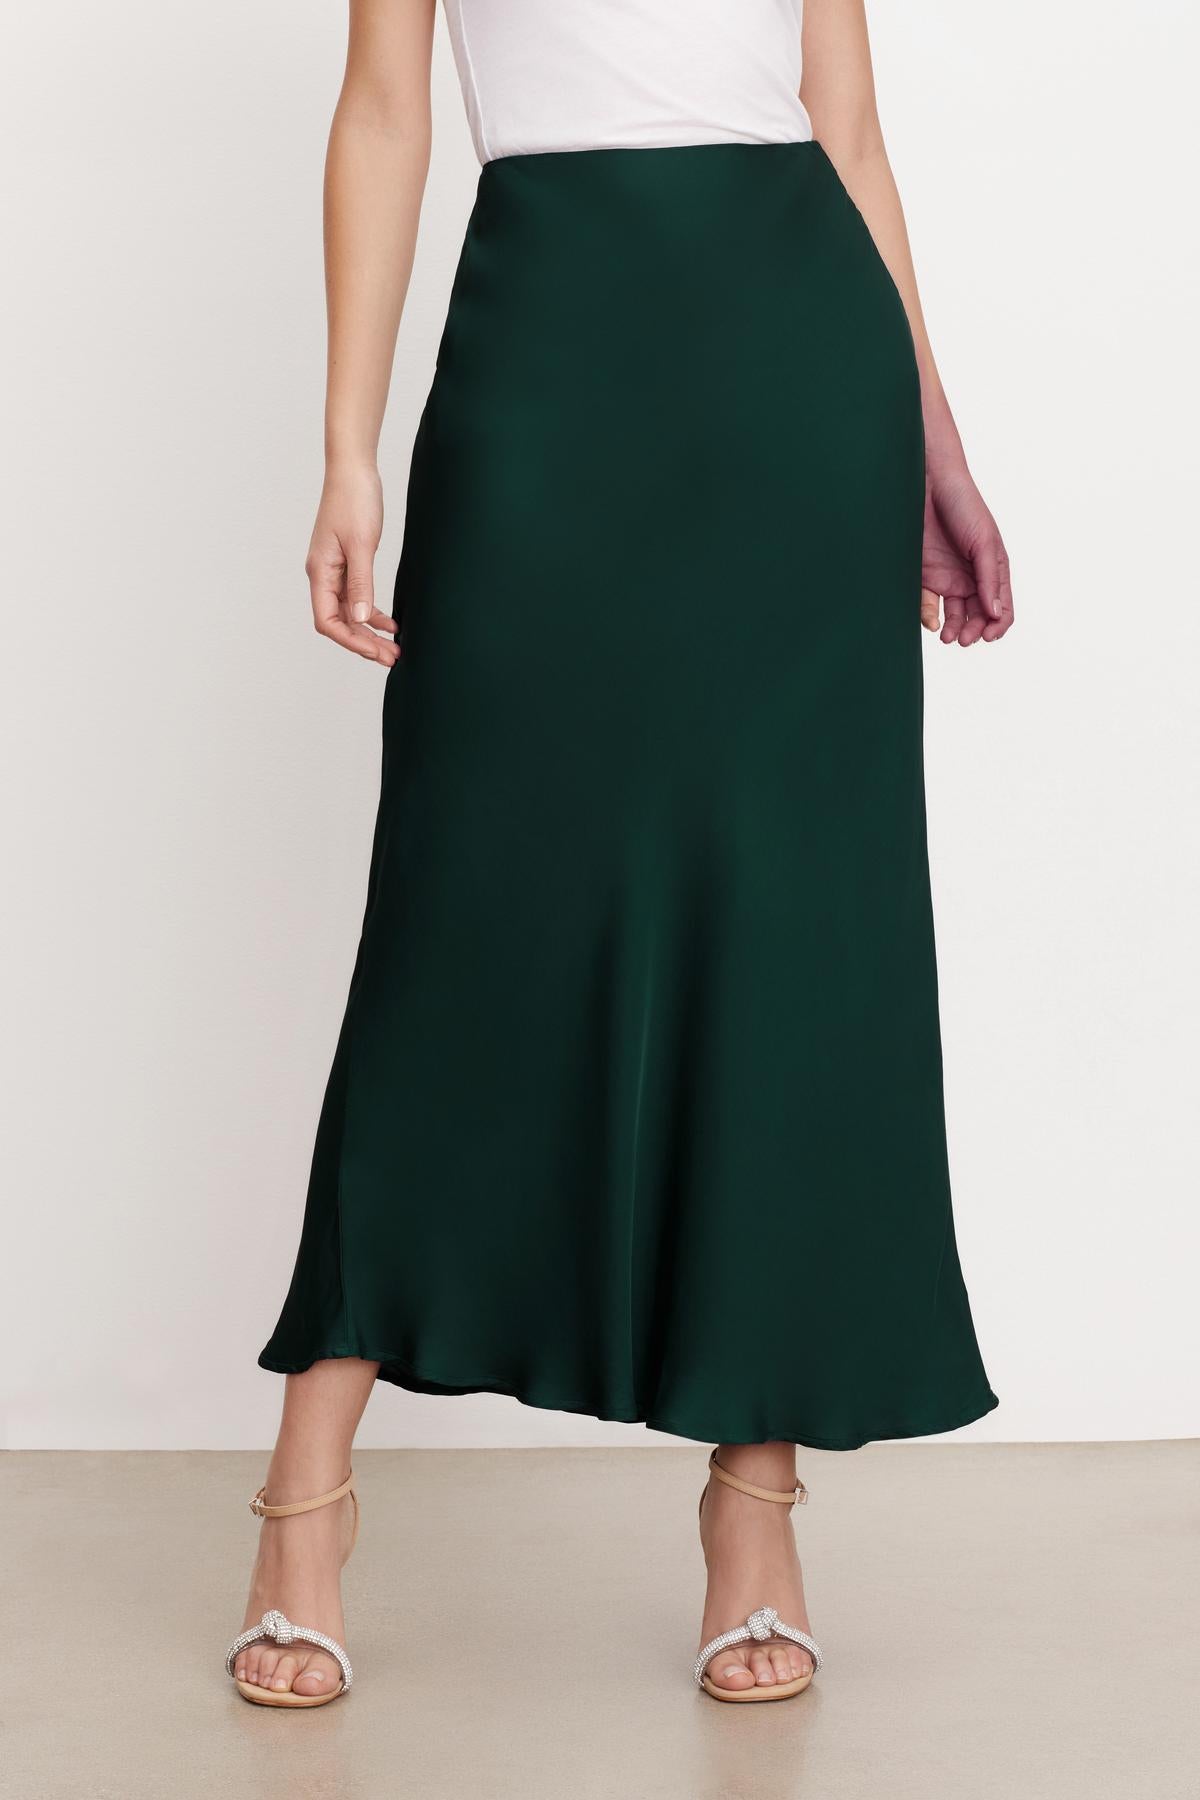   A woman wearing a CADENCE SATIN MAXI SKIRT by Velvet by Graham & Spencer, with a flattering fit and viscose fabric. 